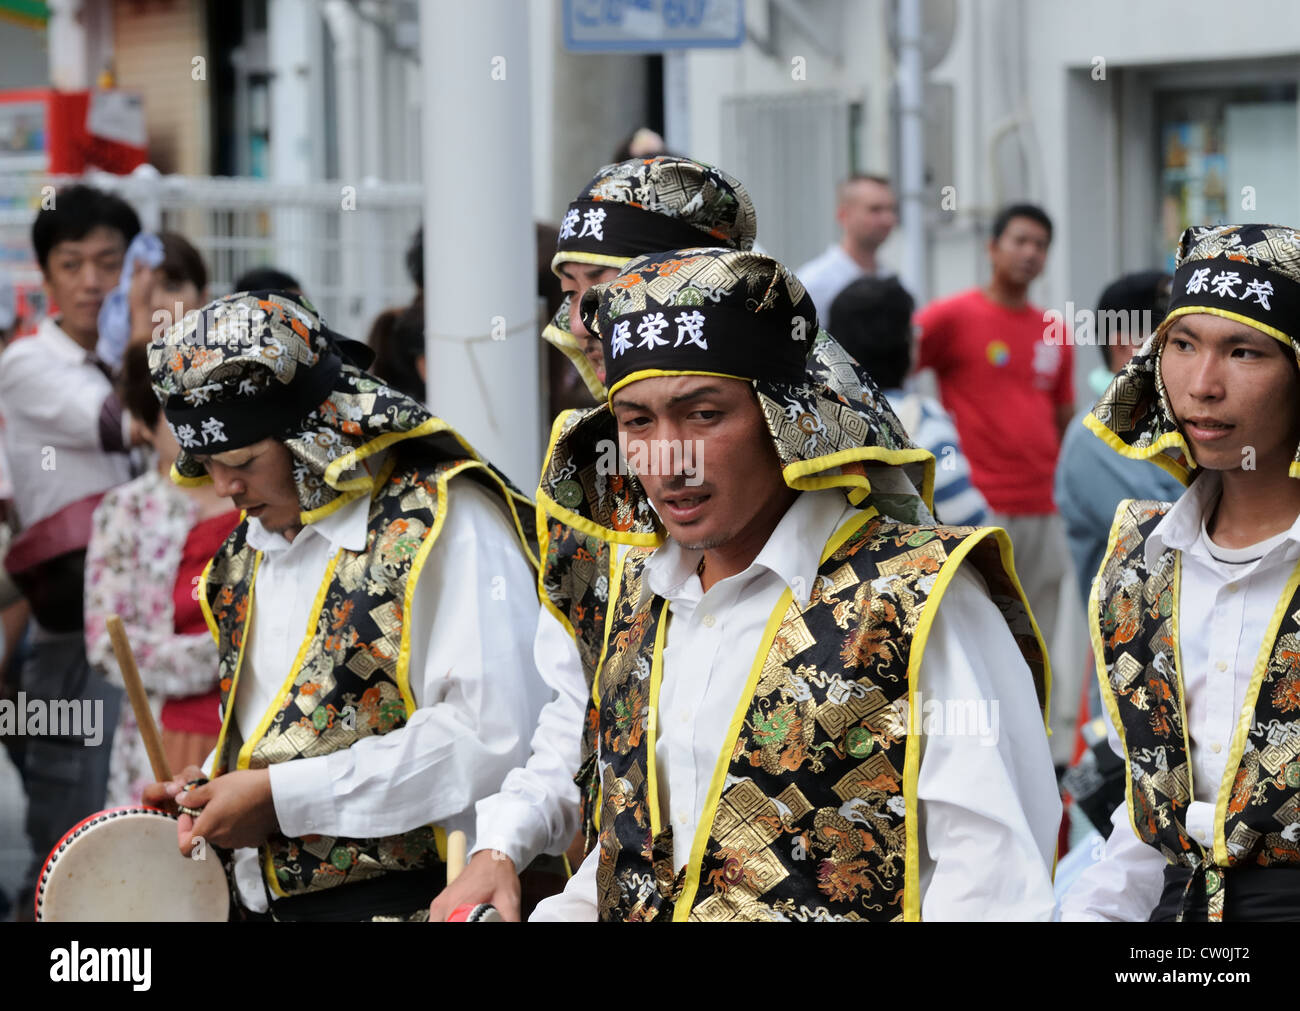 Performers during an 'eisa' festival walk to the next performance location. Stock Photo